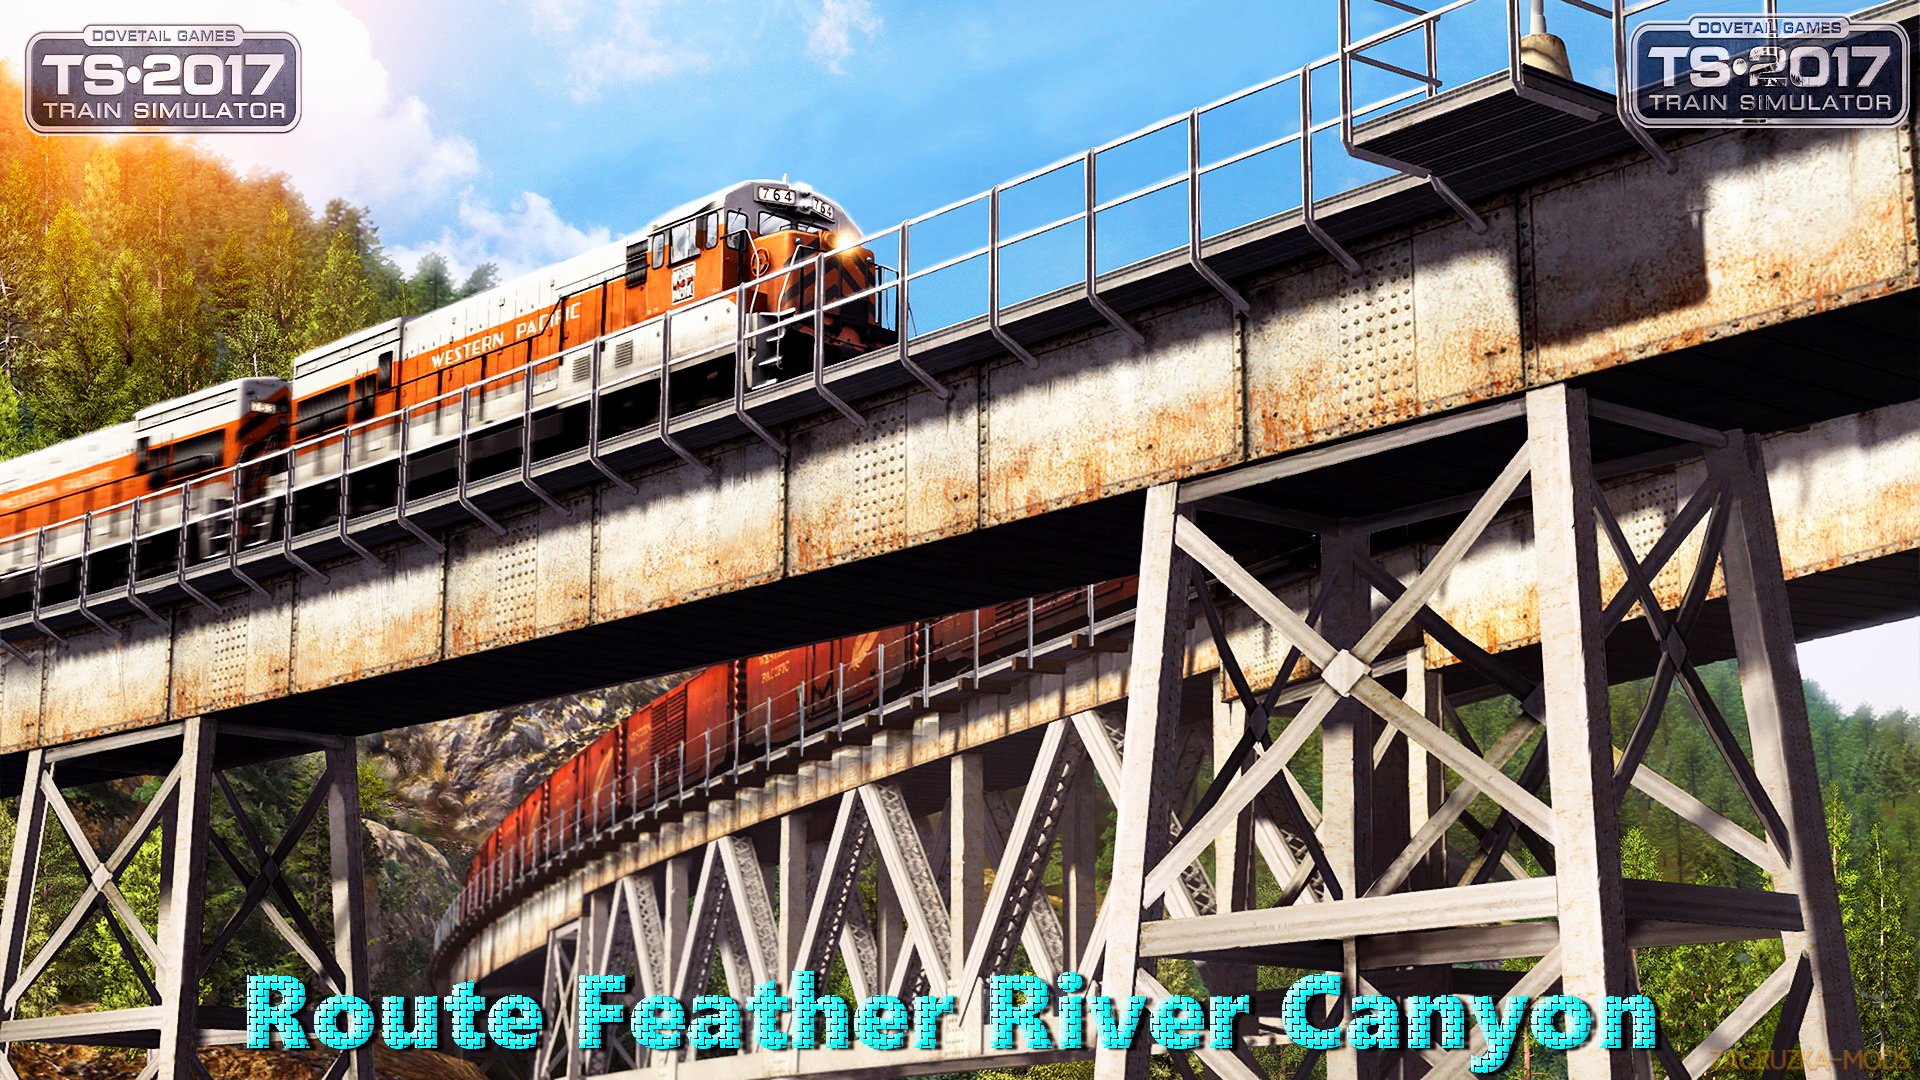 Route Feather River Canyon v1.0 for TS 2017